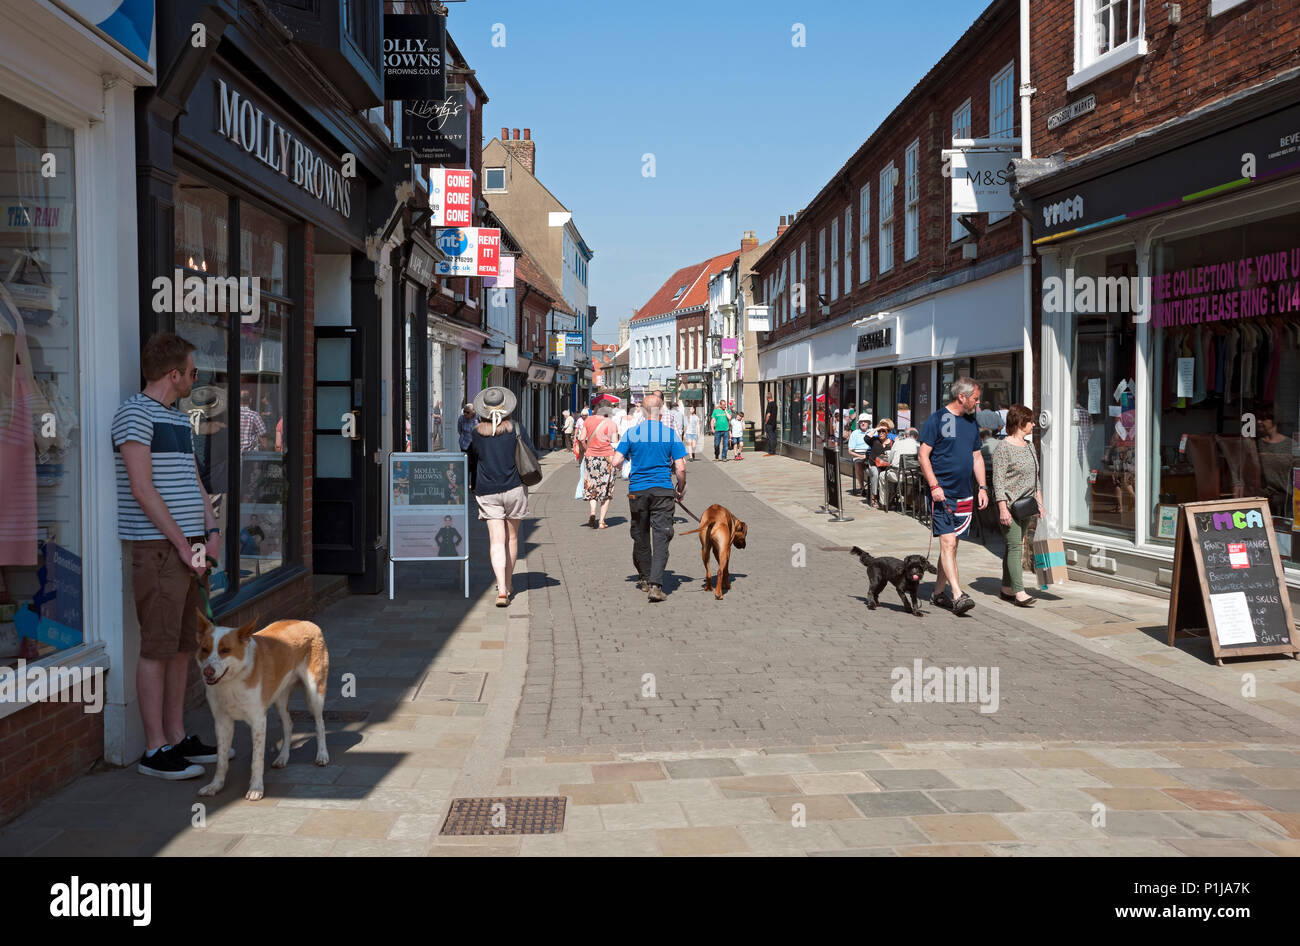 People shoppers visiting walking in the town centre in spring Beverley East Yorkshire England UK United Kingdom GB Great Britain Stock Photo